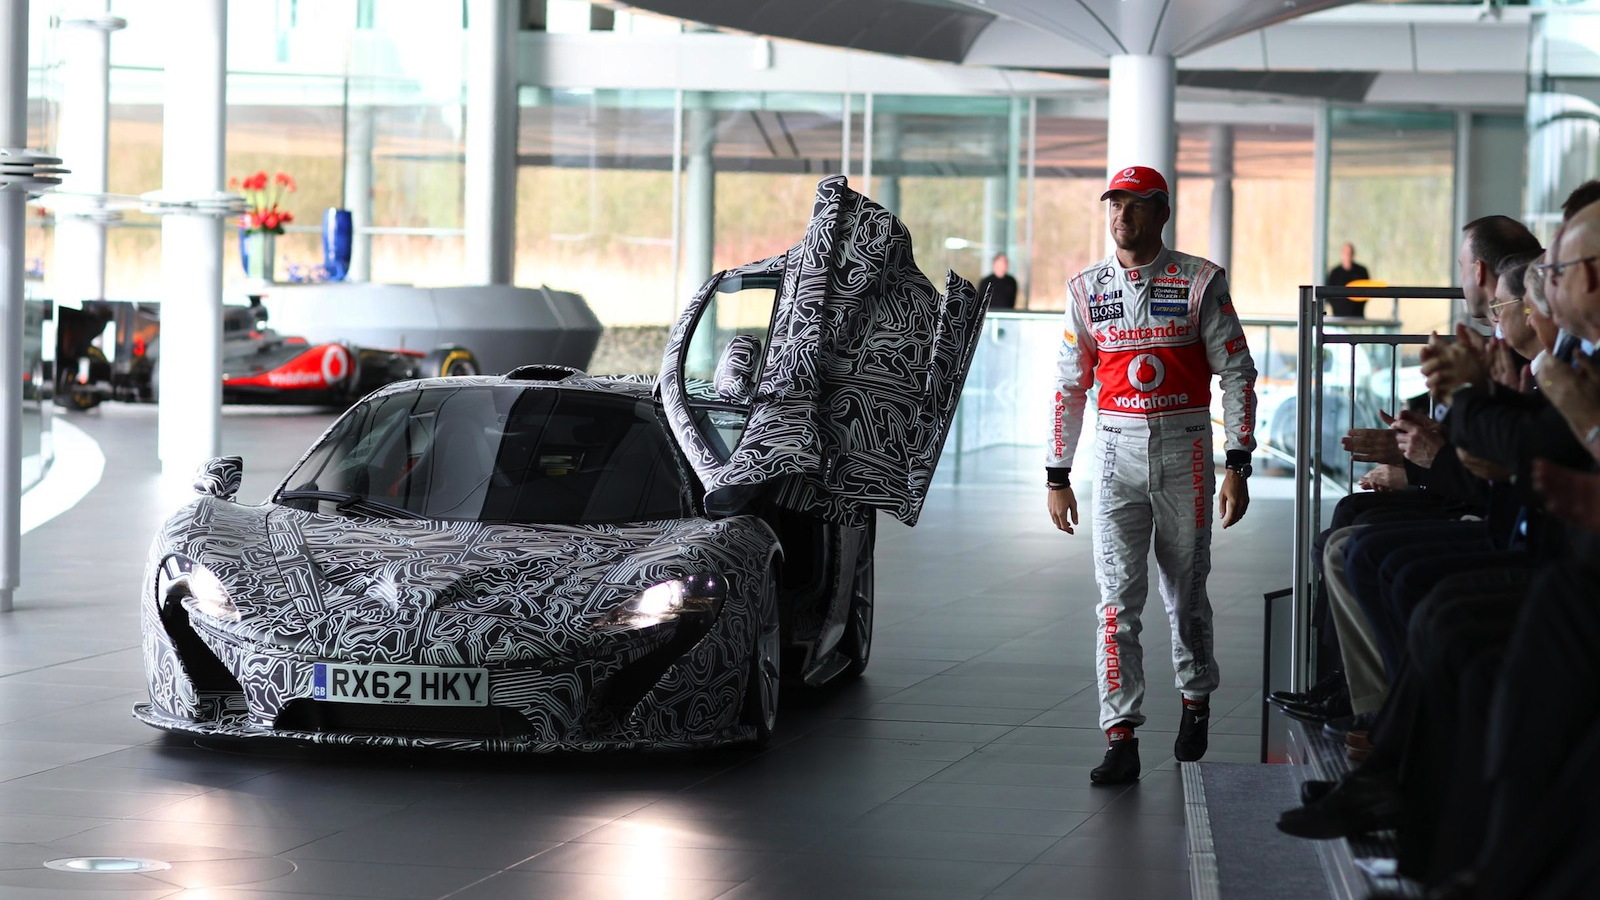 The upcoming McLaren P1 makes a cameo at the MP4-28 reveal